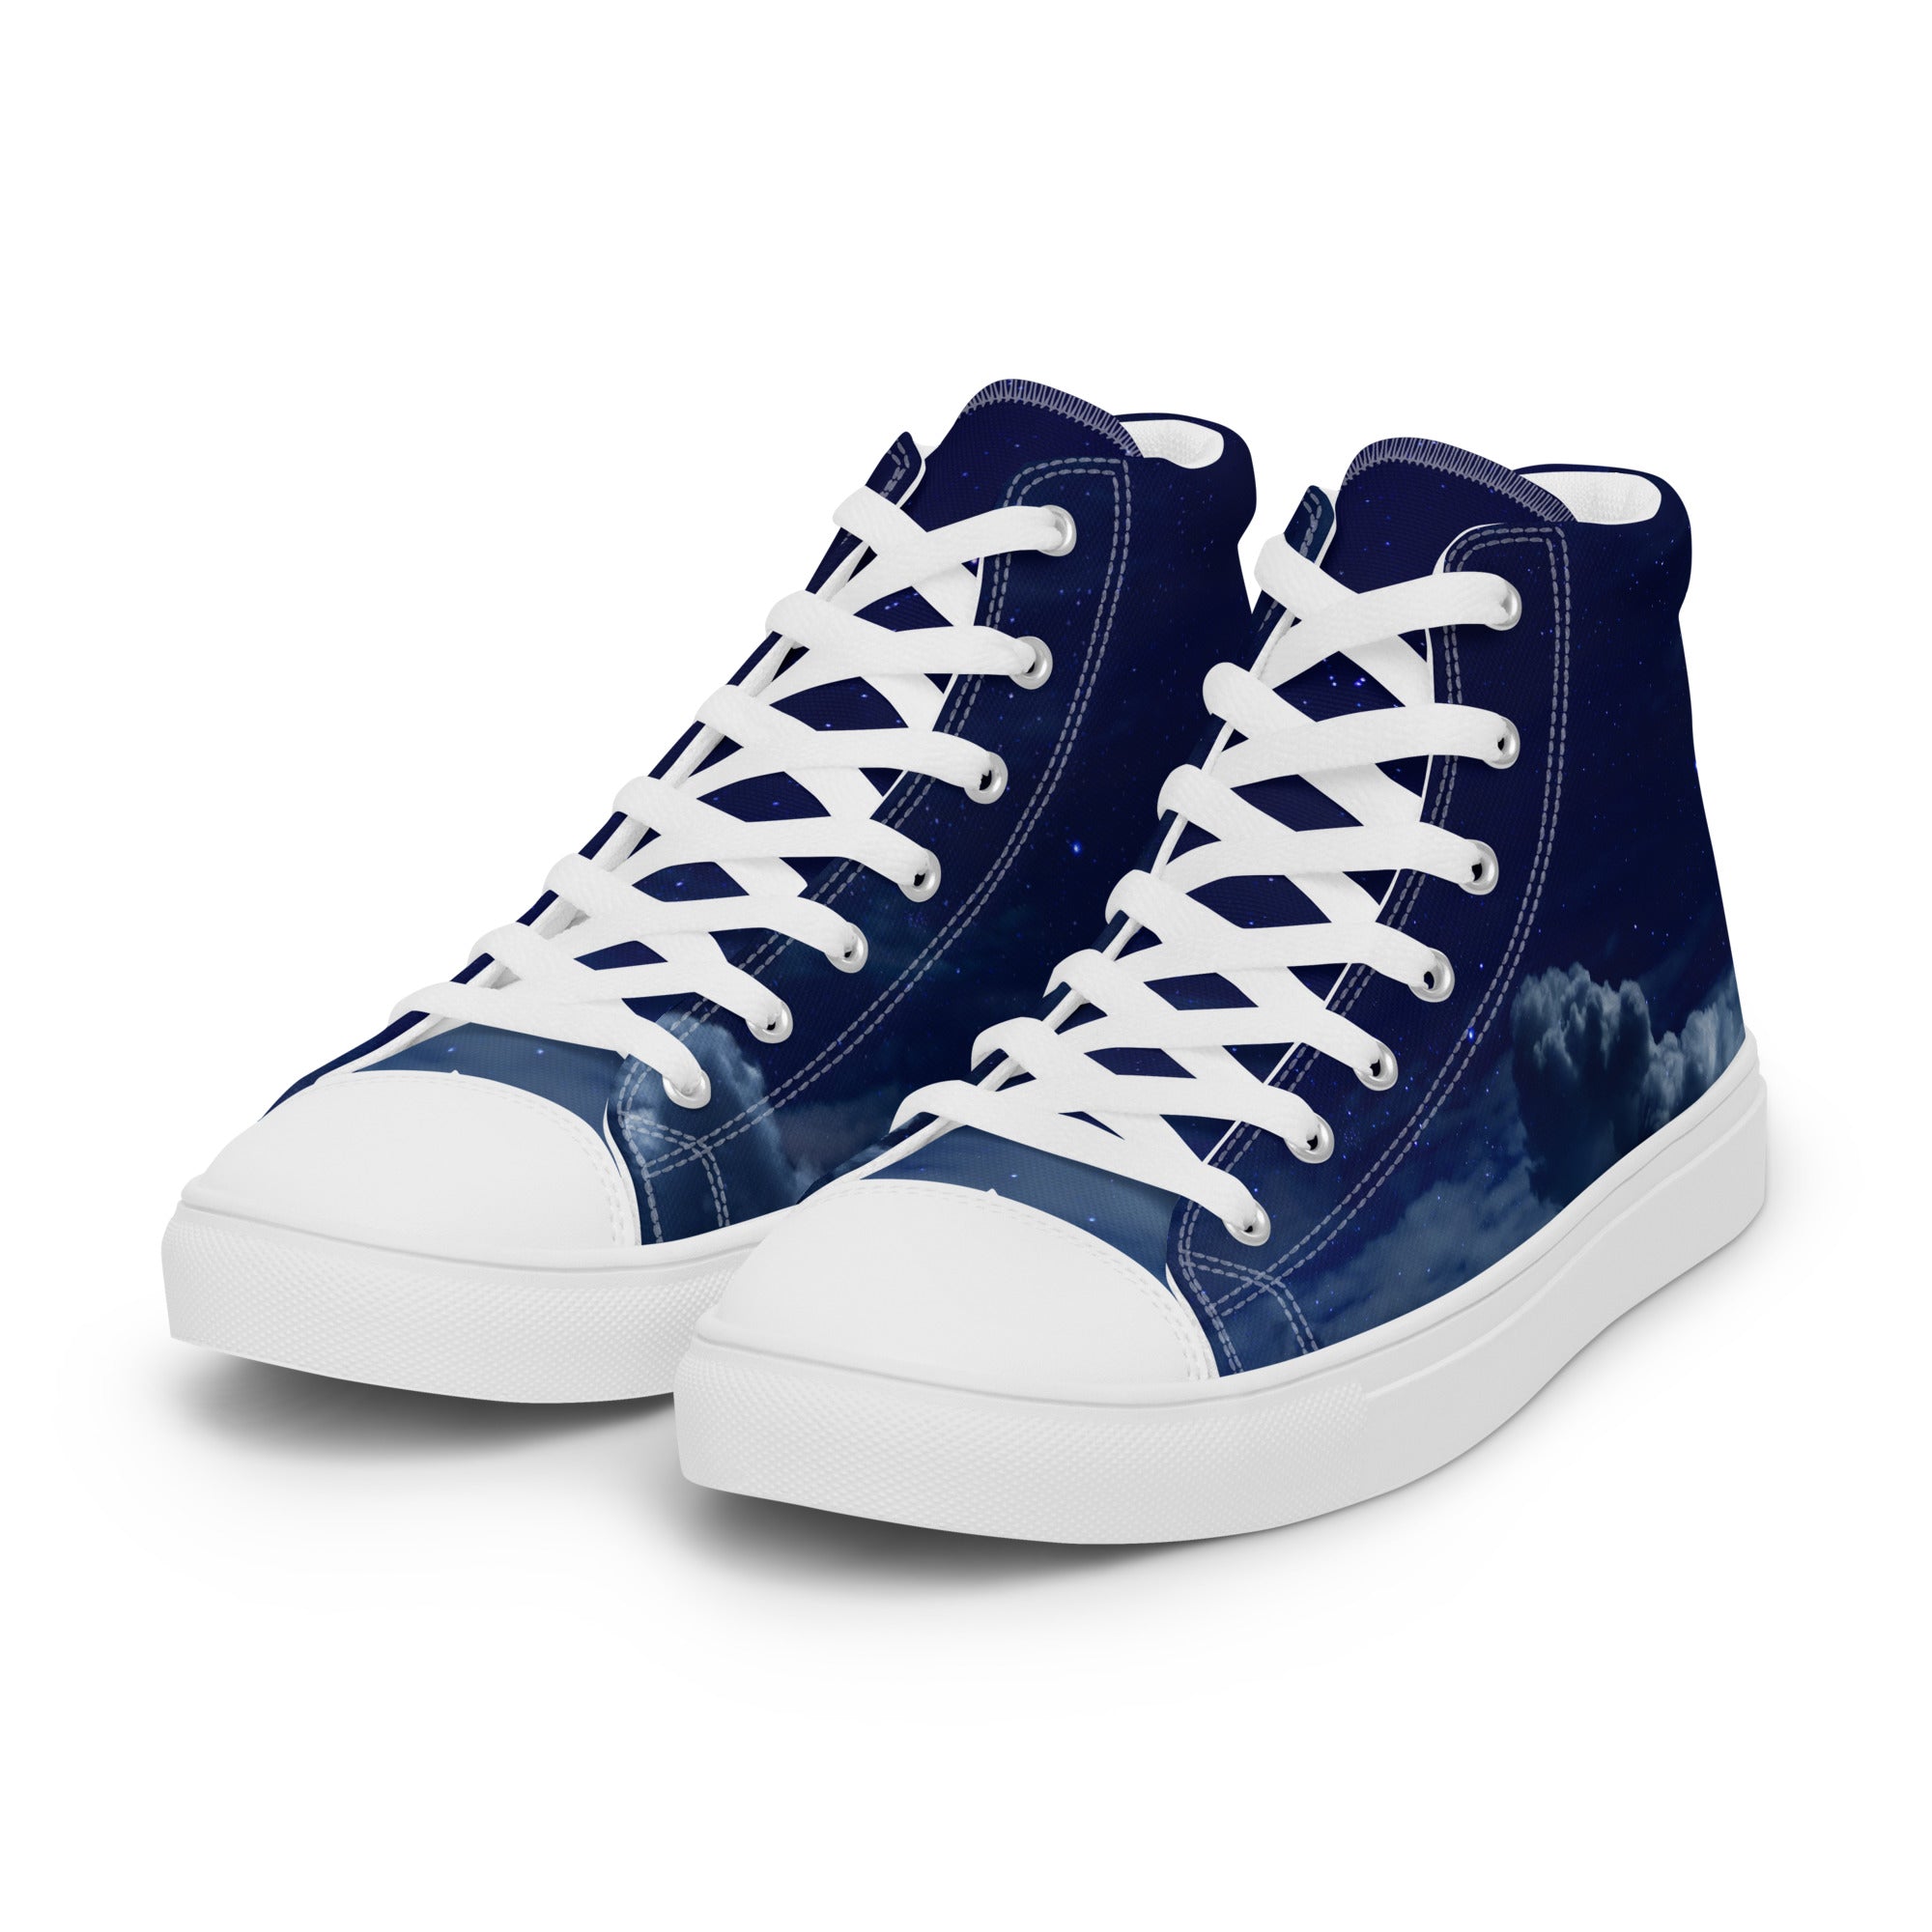 Night Sky Women’s high top canvas shoes